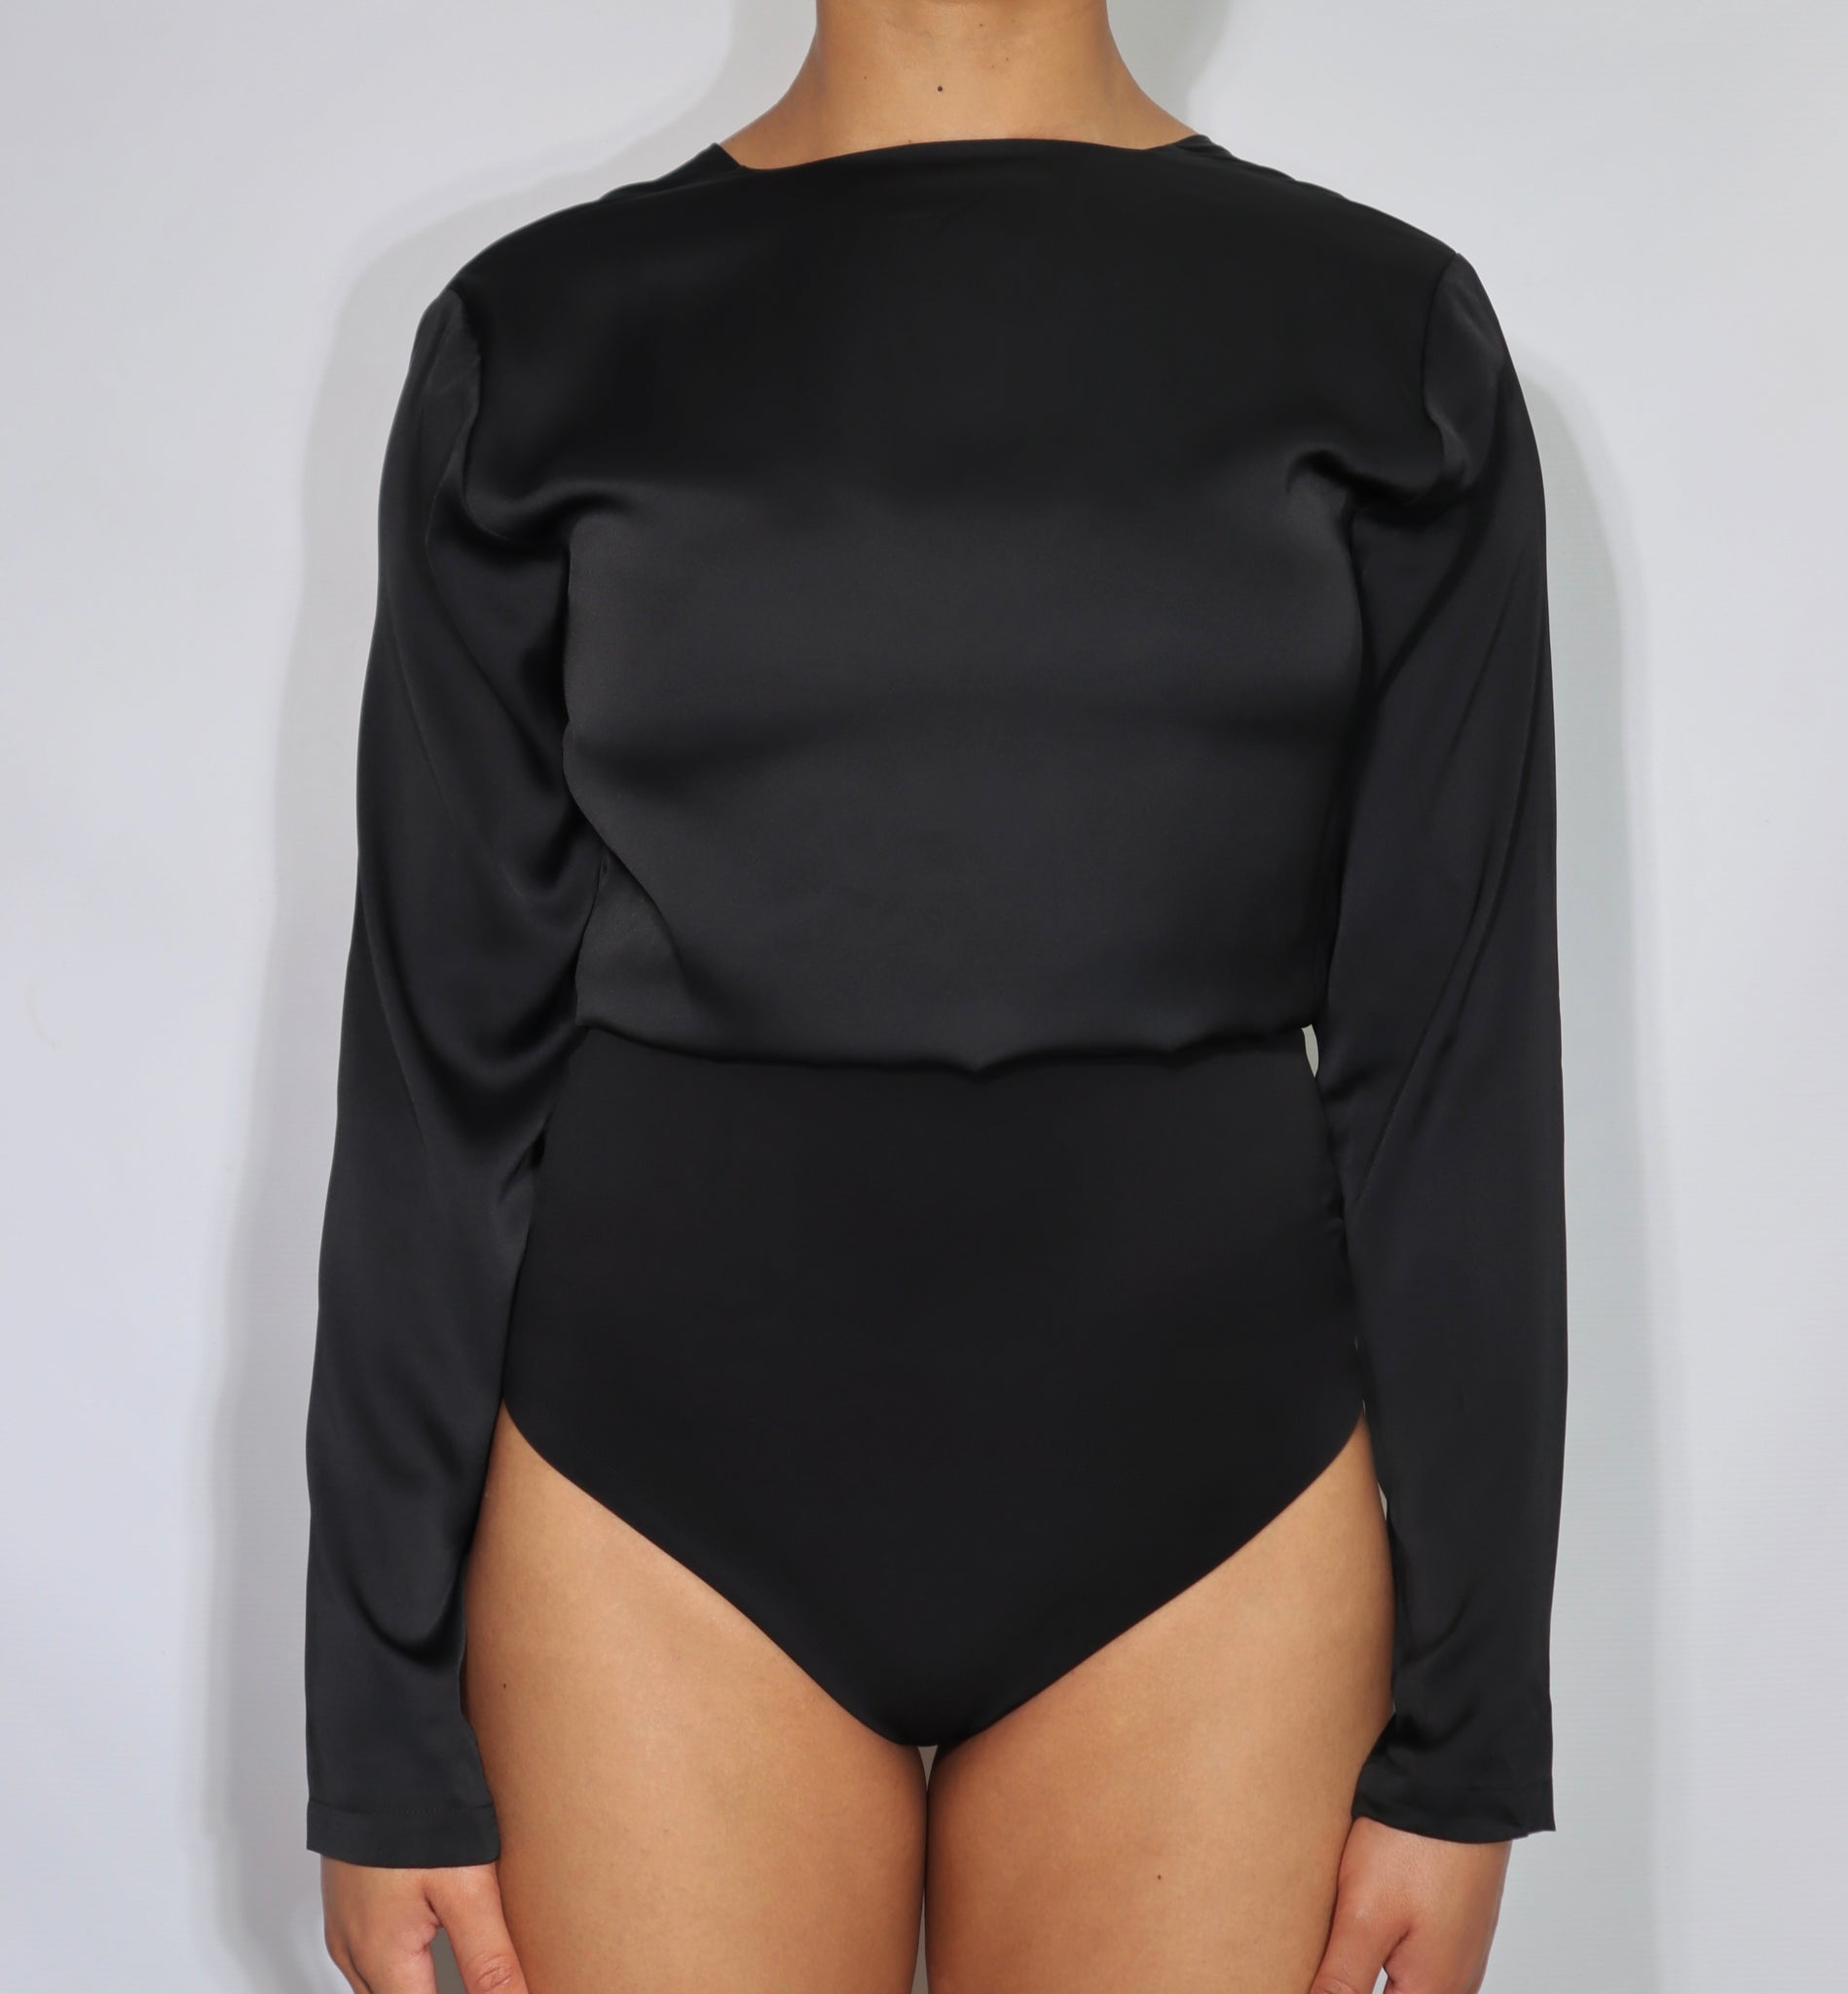 ALL BODYSUITS – Elrstyle